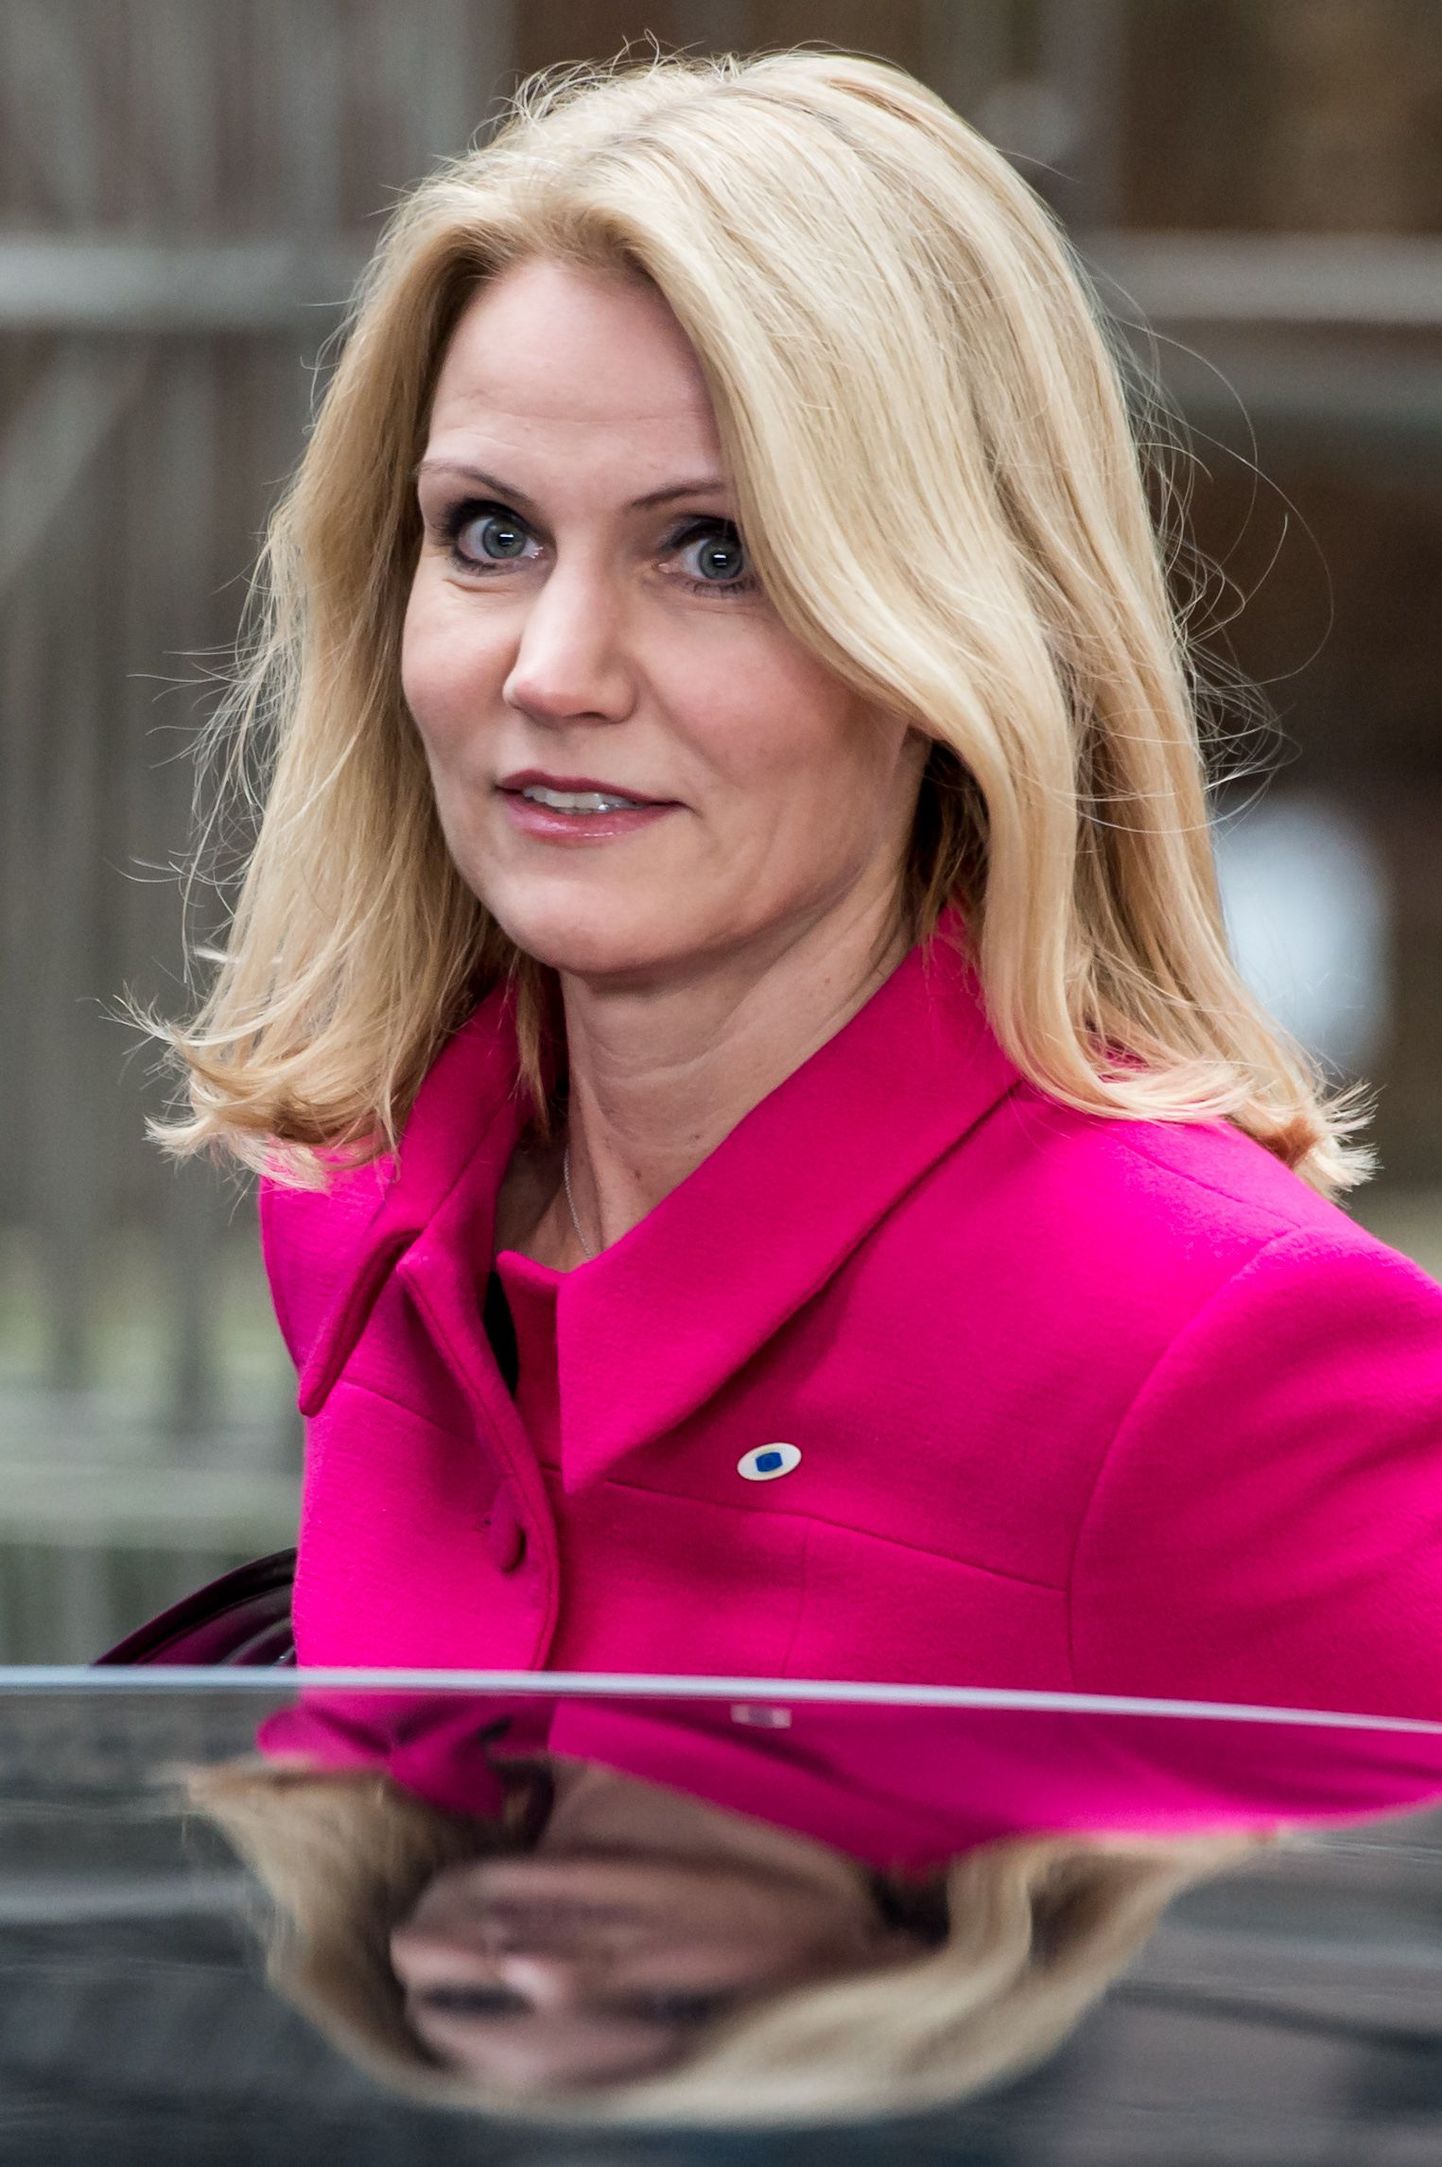 Denmark's Prime Minister Helle Thorning-Schmidt leaves a EU Budget summit at the European Council building for a break, in Brussels on Friday, Feb. 8, 2013. European Union leaders closed in on a deal that would cut the bloc's budget for the first time in history and deliver a strong message that years of expanding EU powers were on the wane. If a deal emerges Friday, the budget would still need to be ratified by the European Parliament, and early signs suggest that may prove problematic. (AP Photo/Geert Vanden Wijngaert) / SCANPIX Code: 436